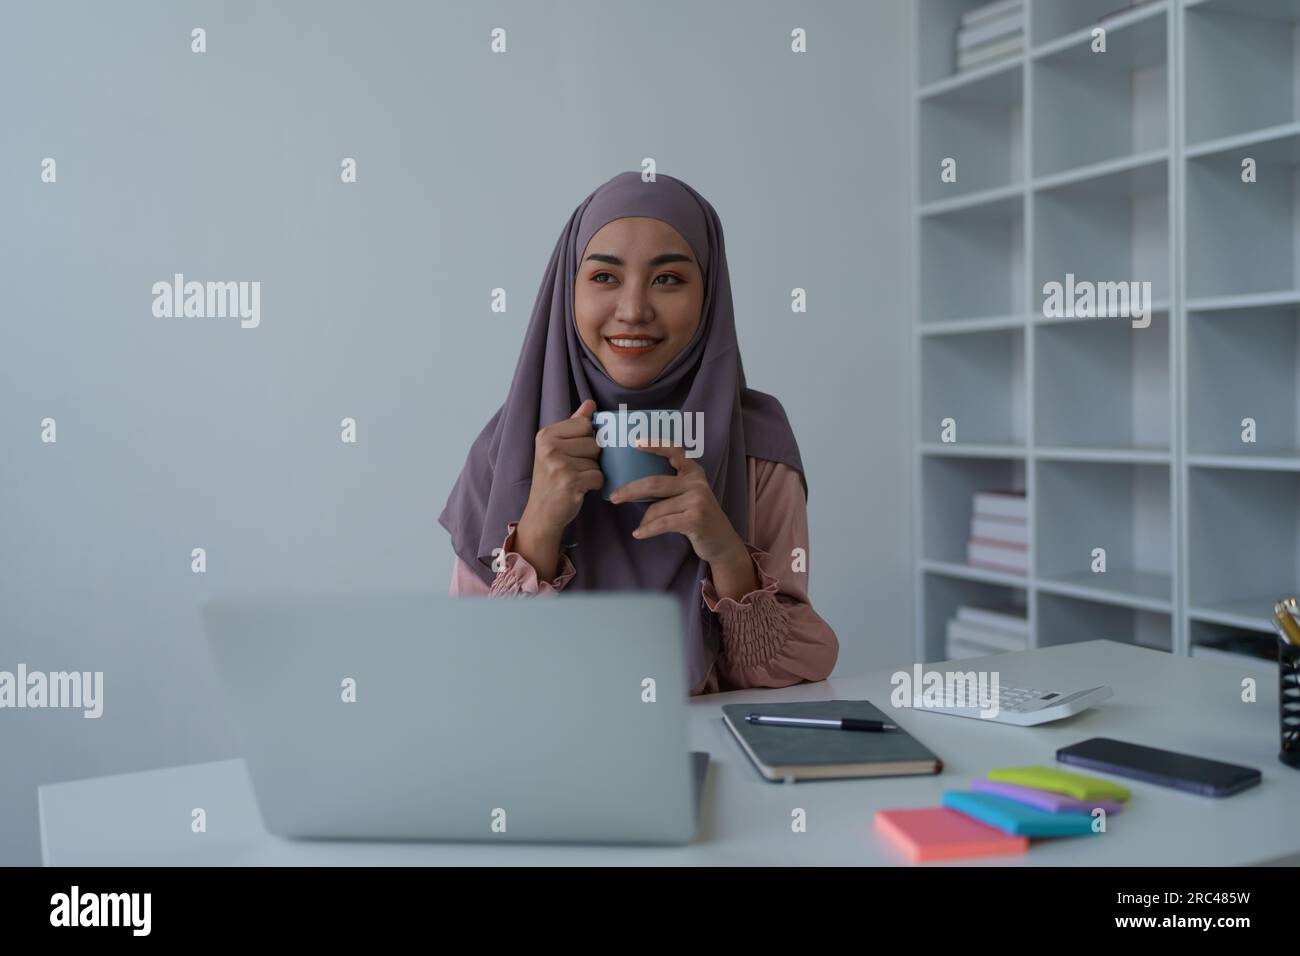 Business, finance and employment, female successful entrepreneurs concept. Confident smiling Muslim woman Stock Photo